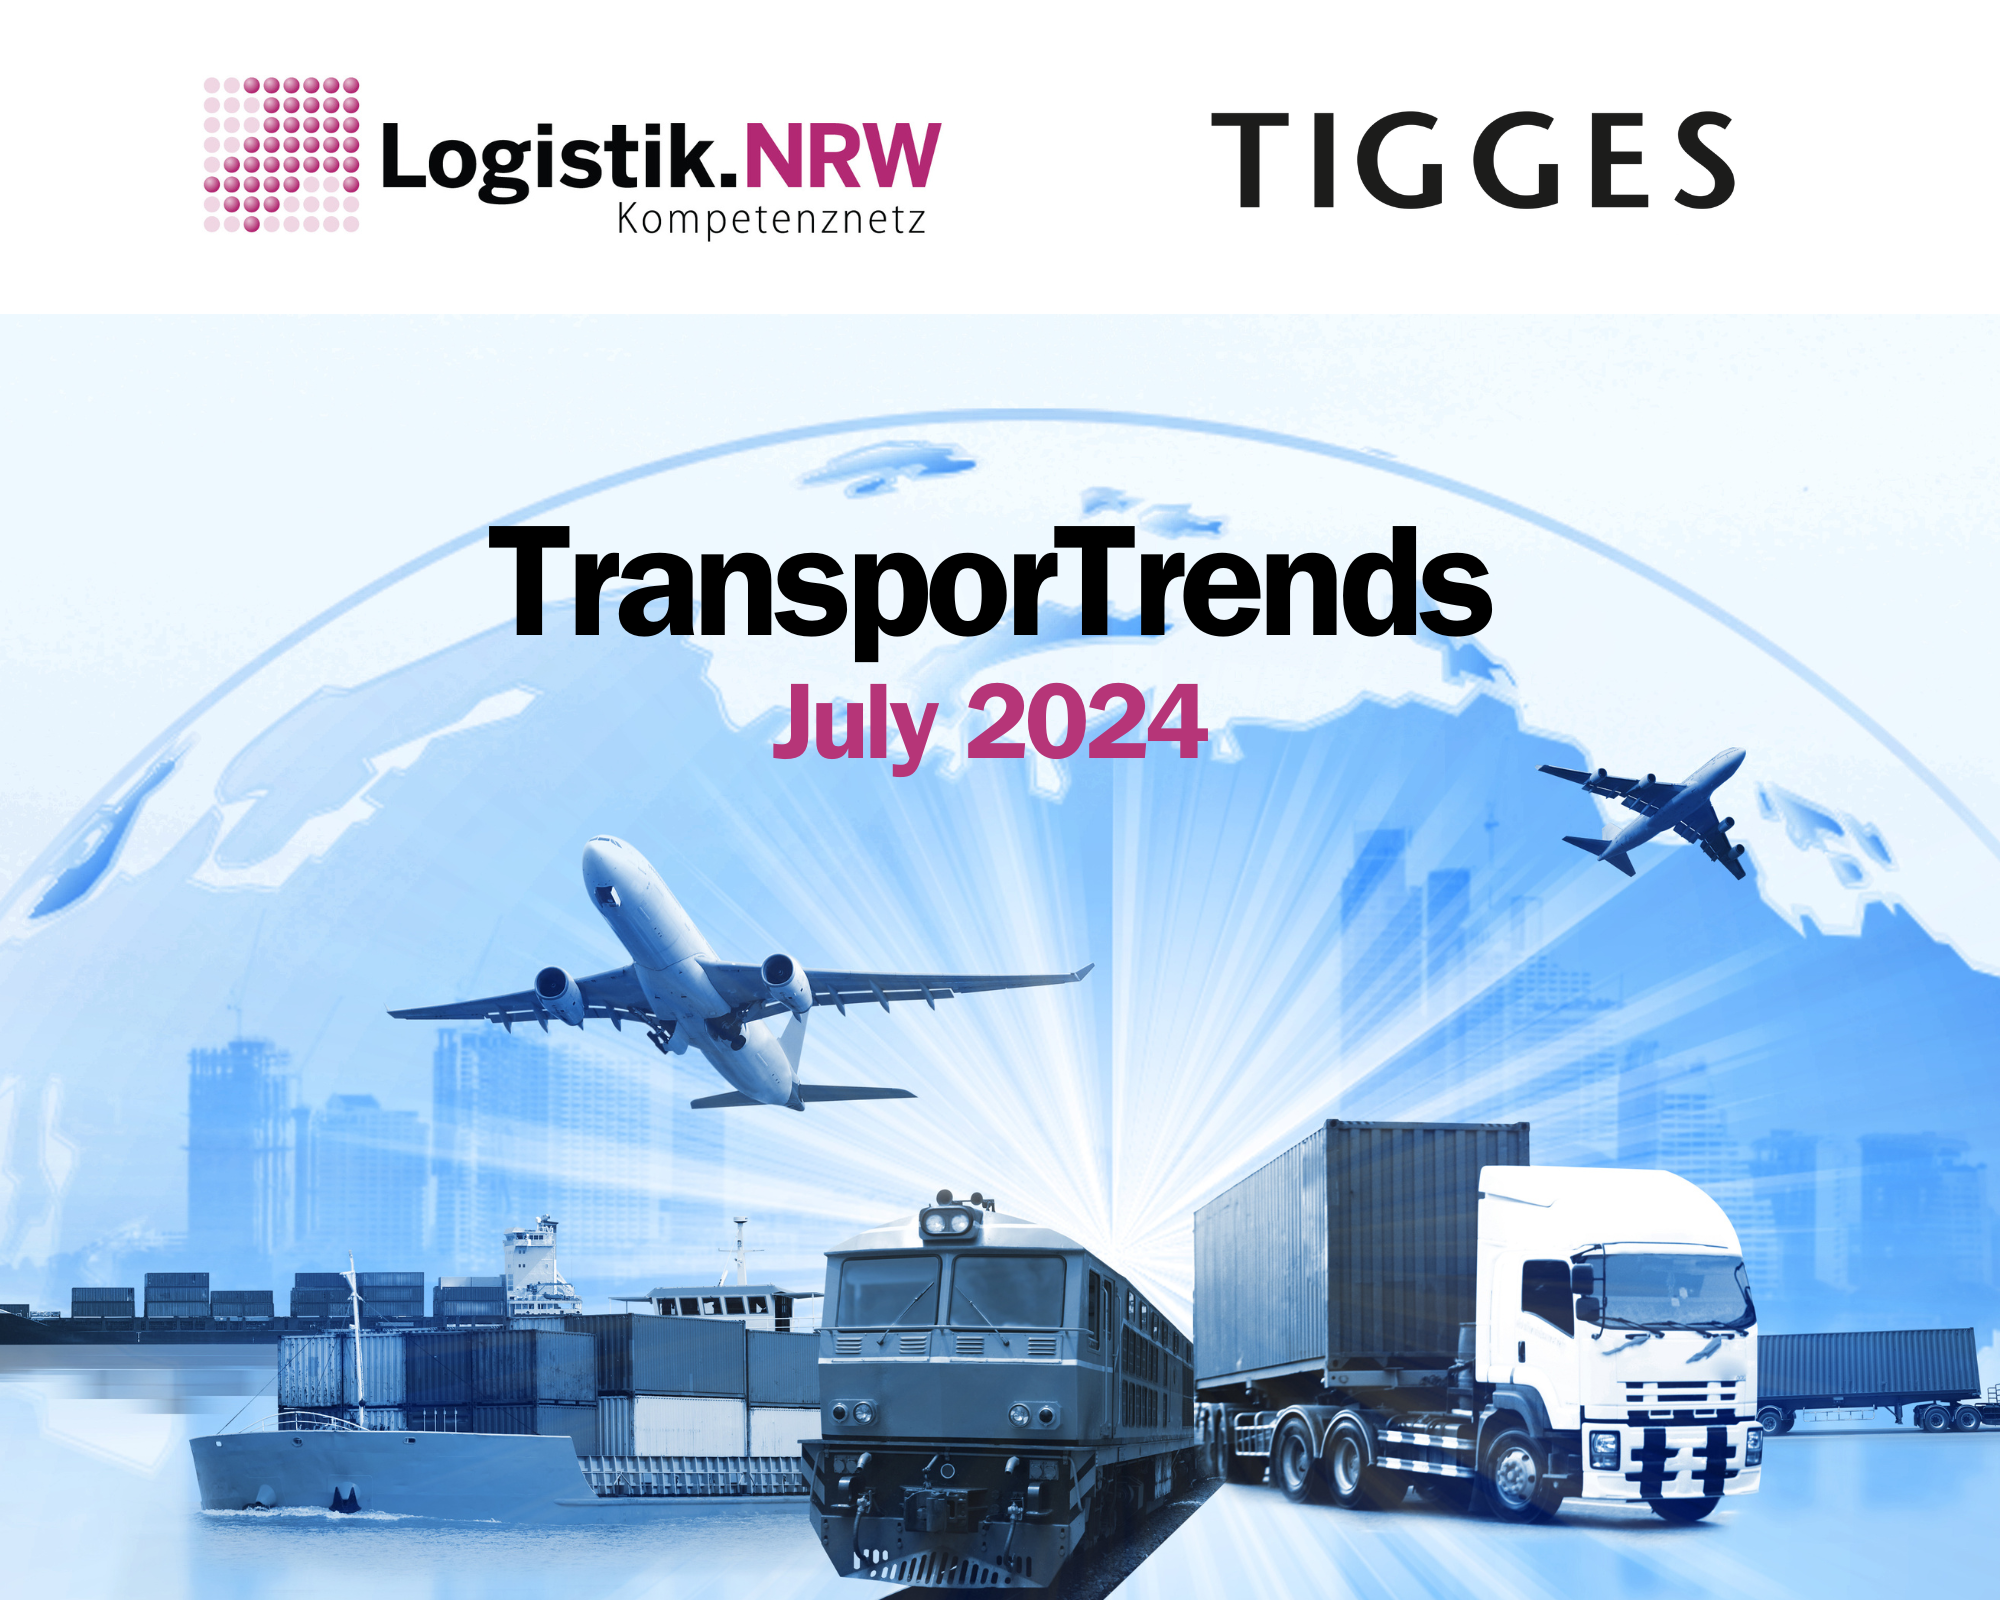 Transportrends July